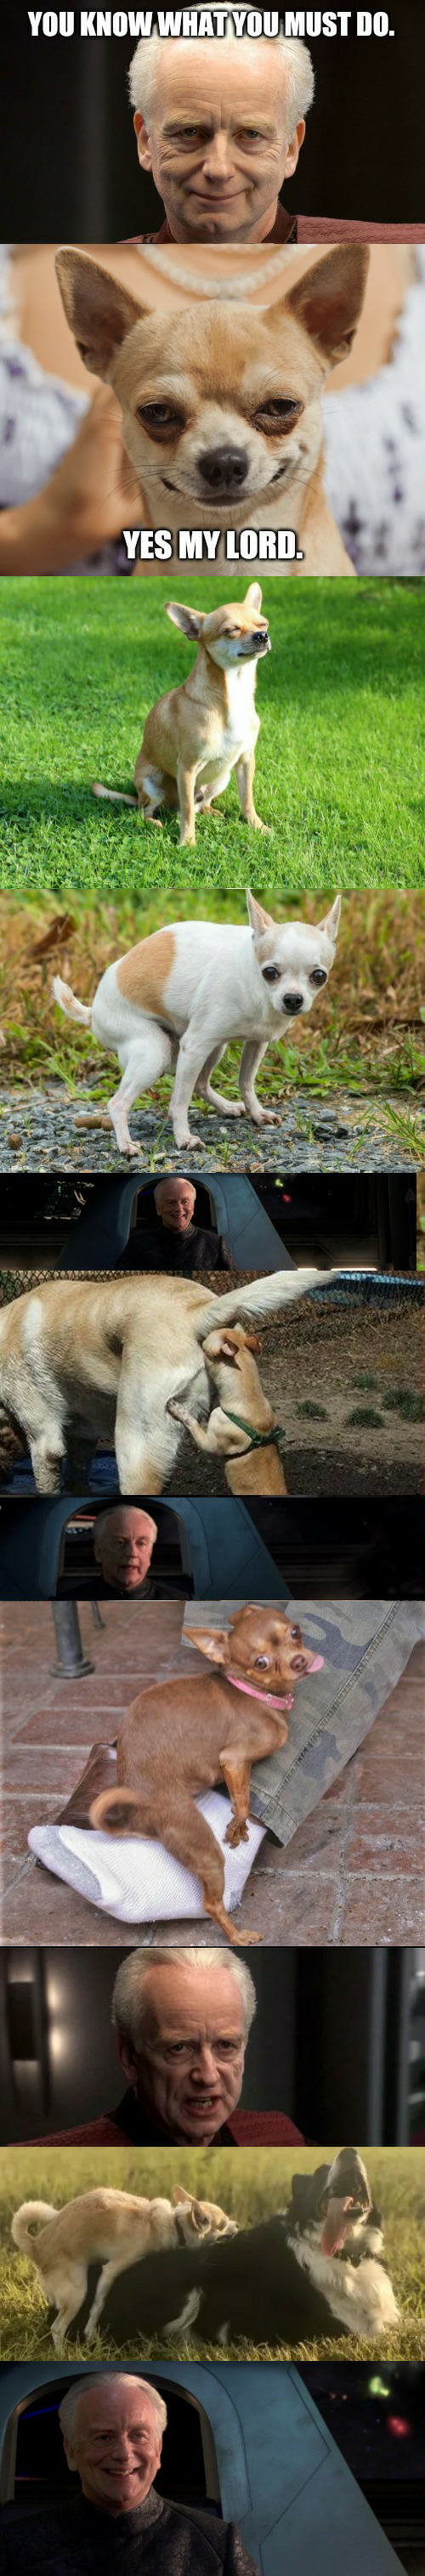 High Quality Palpatine and evil chihuahua template 4 Blank Meme Template